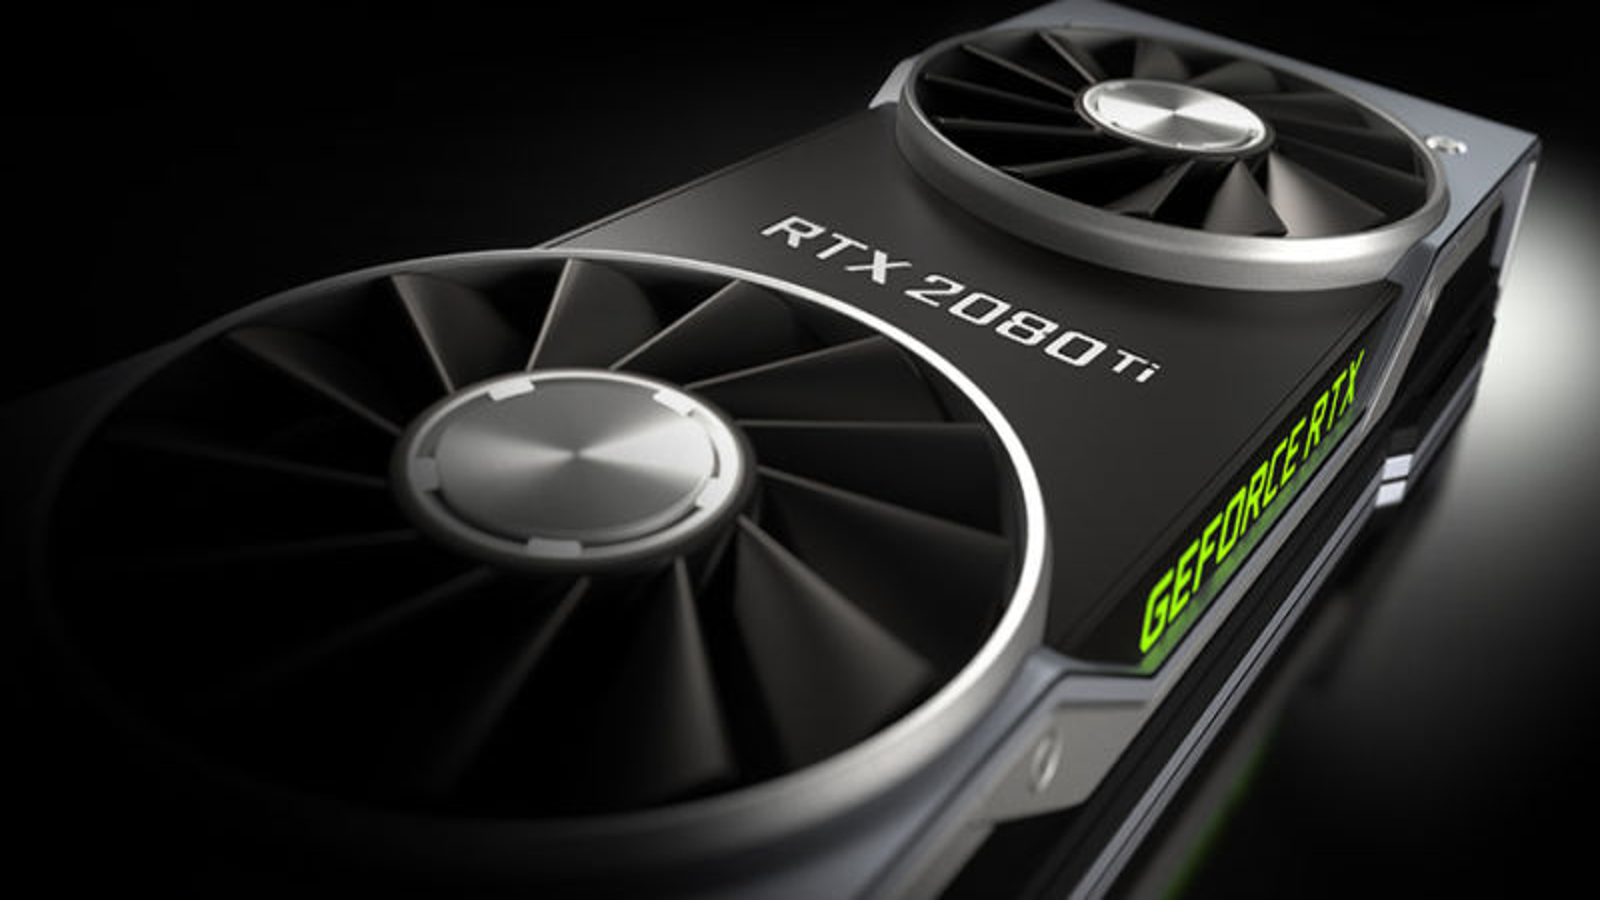 rulle Præfiks gøre det muligt for Nvidia RTX 2080, 2080Ti and 2070: meet the powerful new next generation GeForce  RTX hardware | VG247